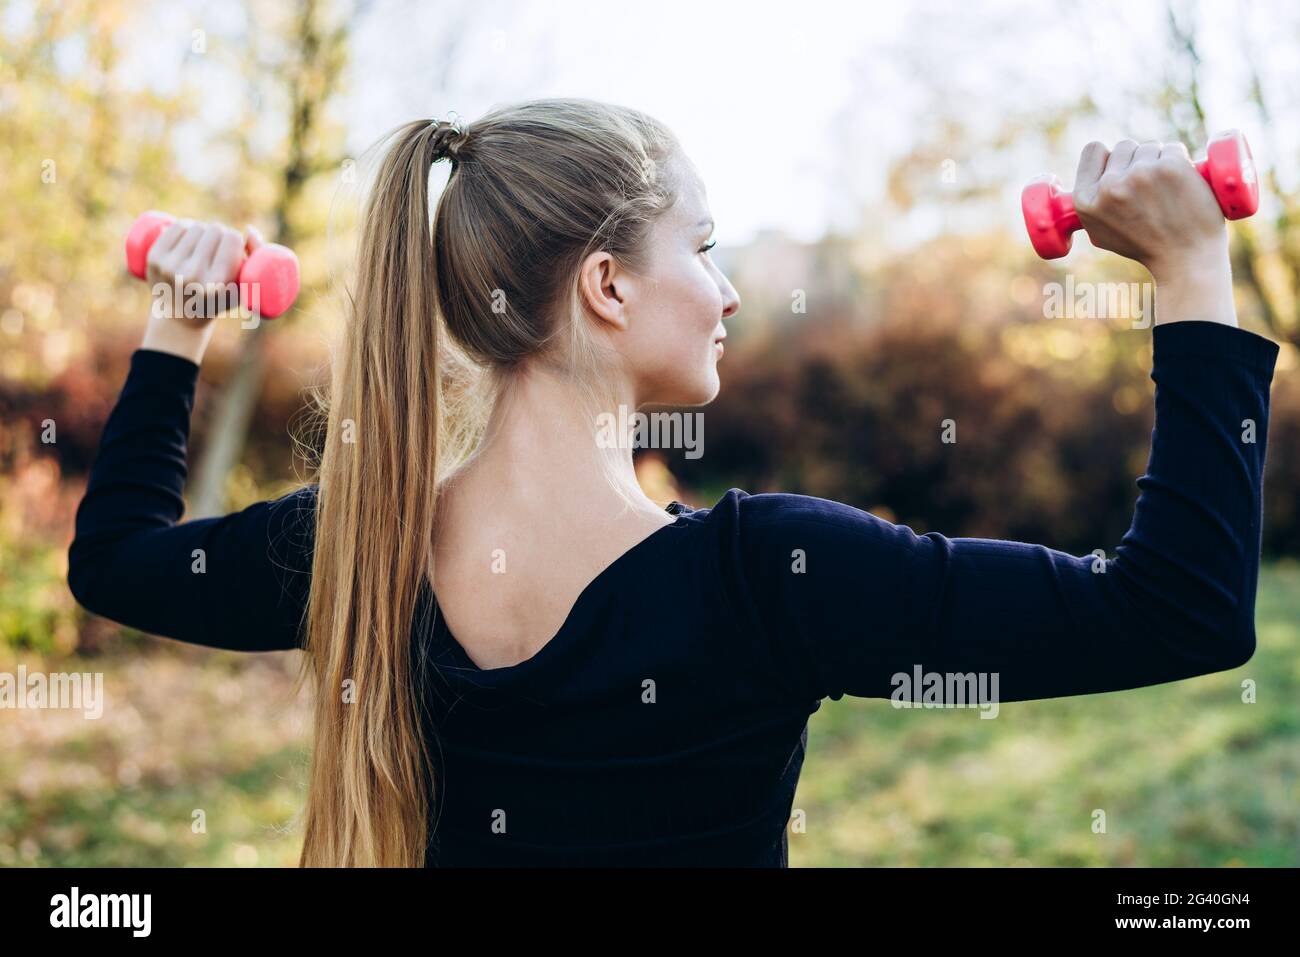 Beautiful woman working out outdoors. Sporty woman training with dumbbells, back view Stock Photo